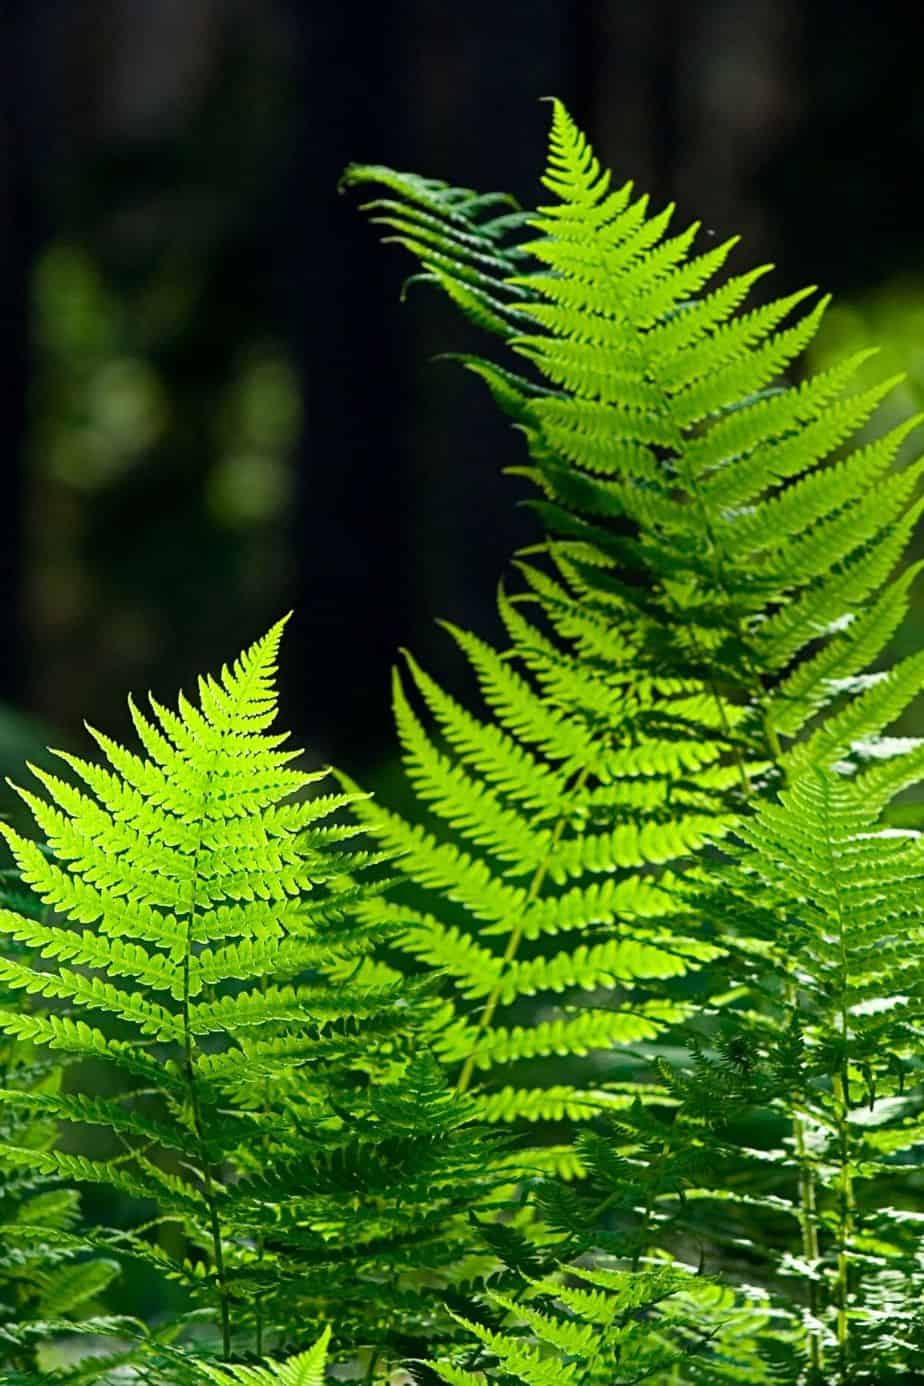 Ferns are low-maintenance plants that only require shady areas like north-facing balconies and water to grow